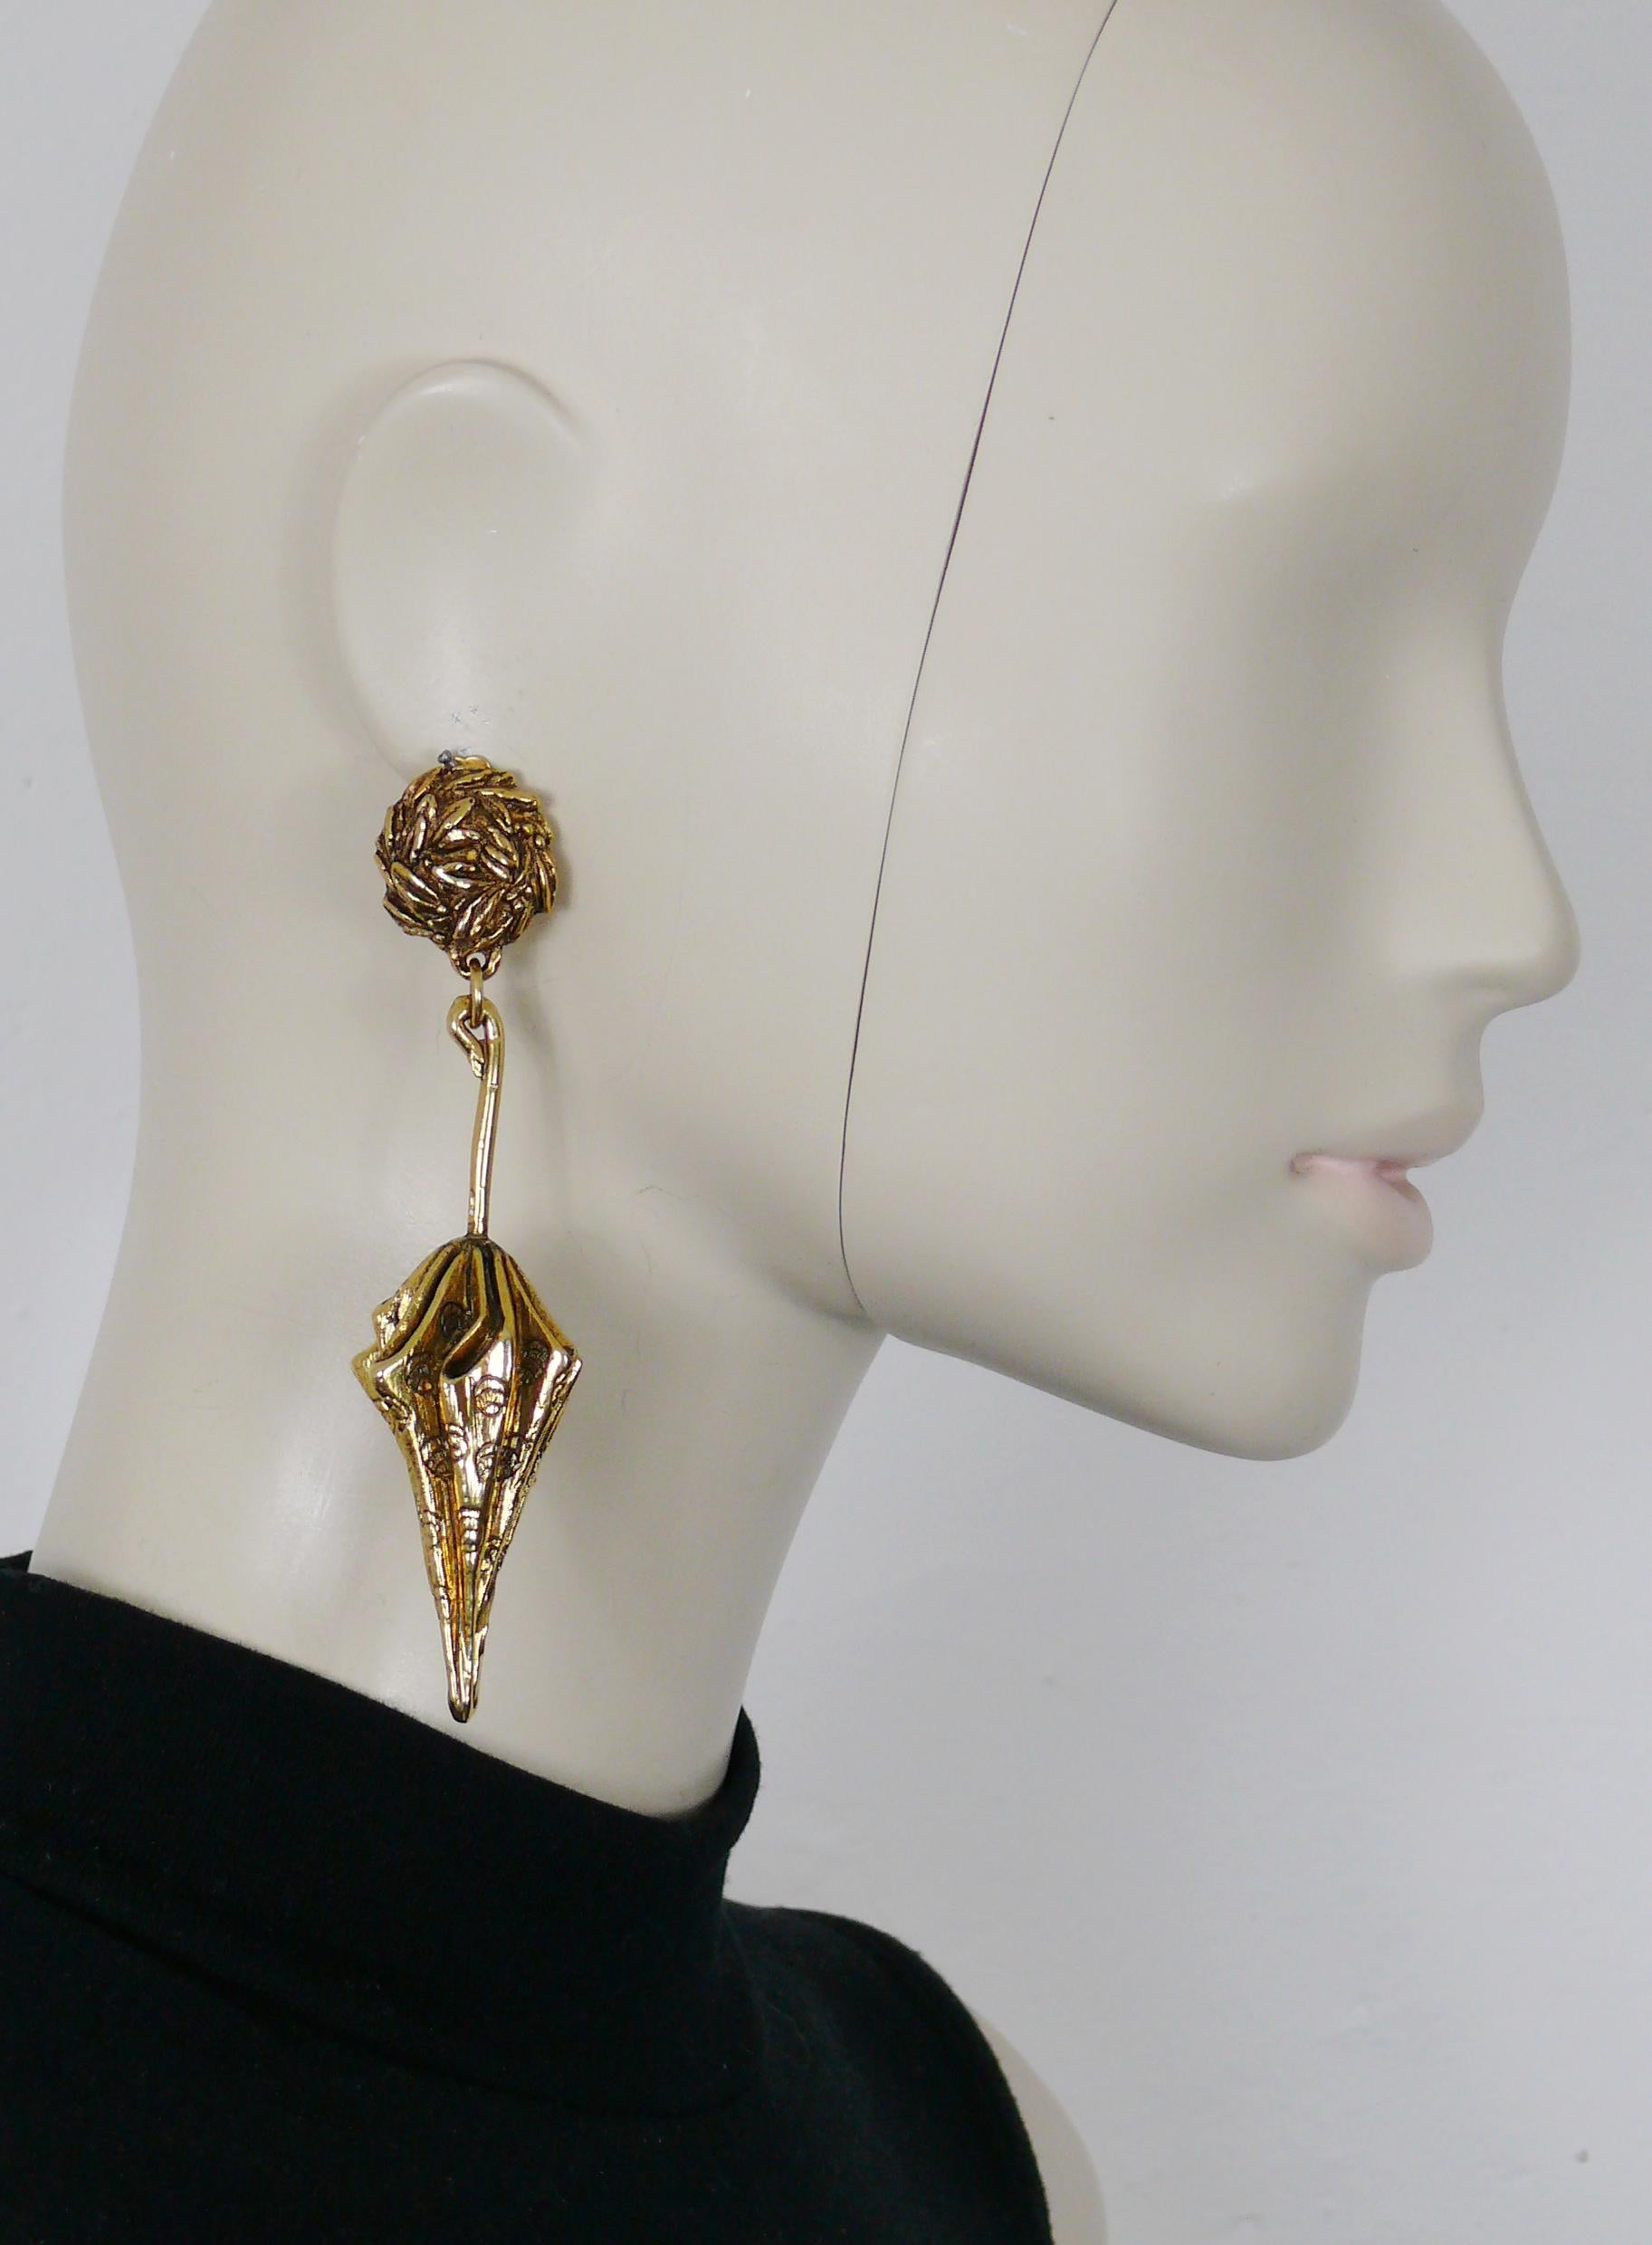 CHANTAL THOMASS (attributed to) vintage antiqued gold toned resin dangling earrings (clip-on) featuring umbrellas.

Unmarked.

Indicative measurements : height approx. 10.6 cm (4.17 inches) / max. width 2.5 cm (0.98 inch).

NOTES
- This is a